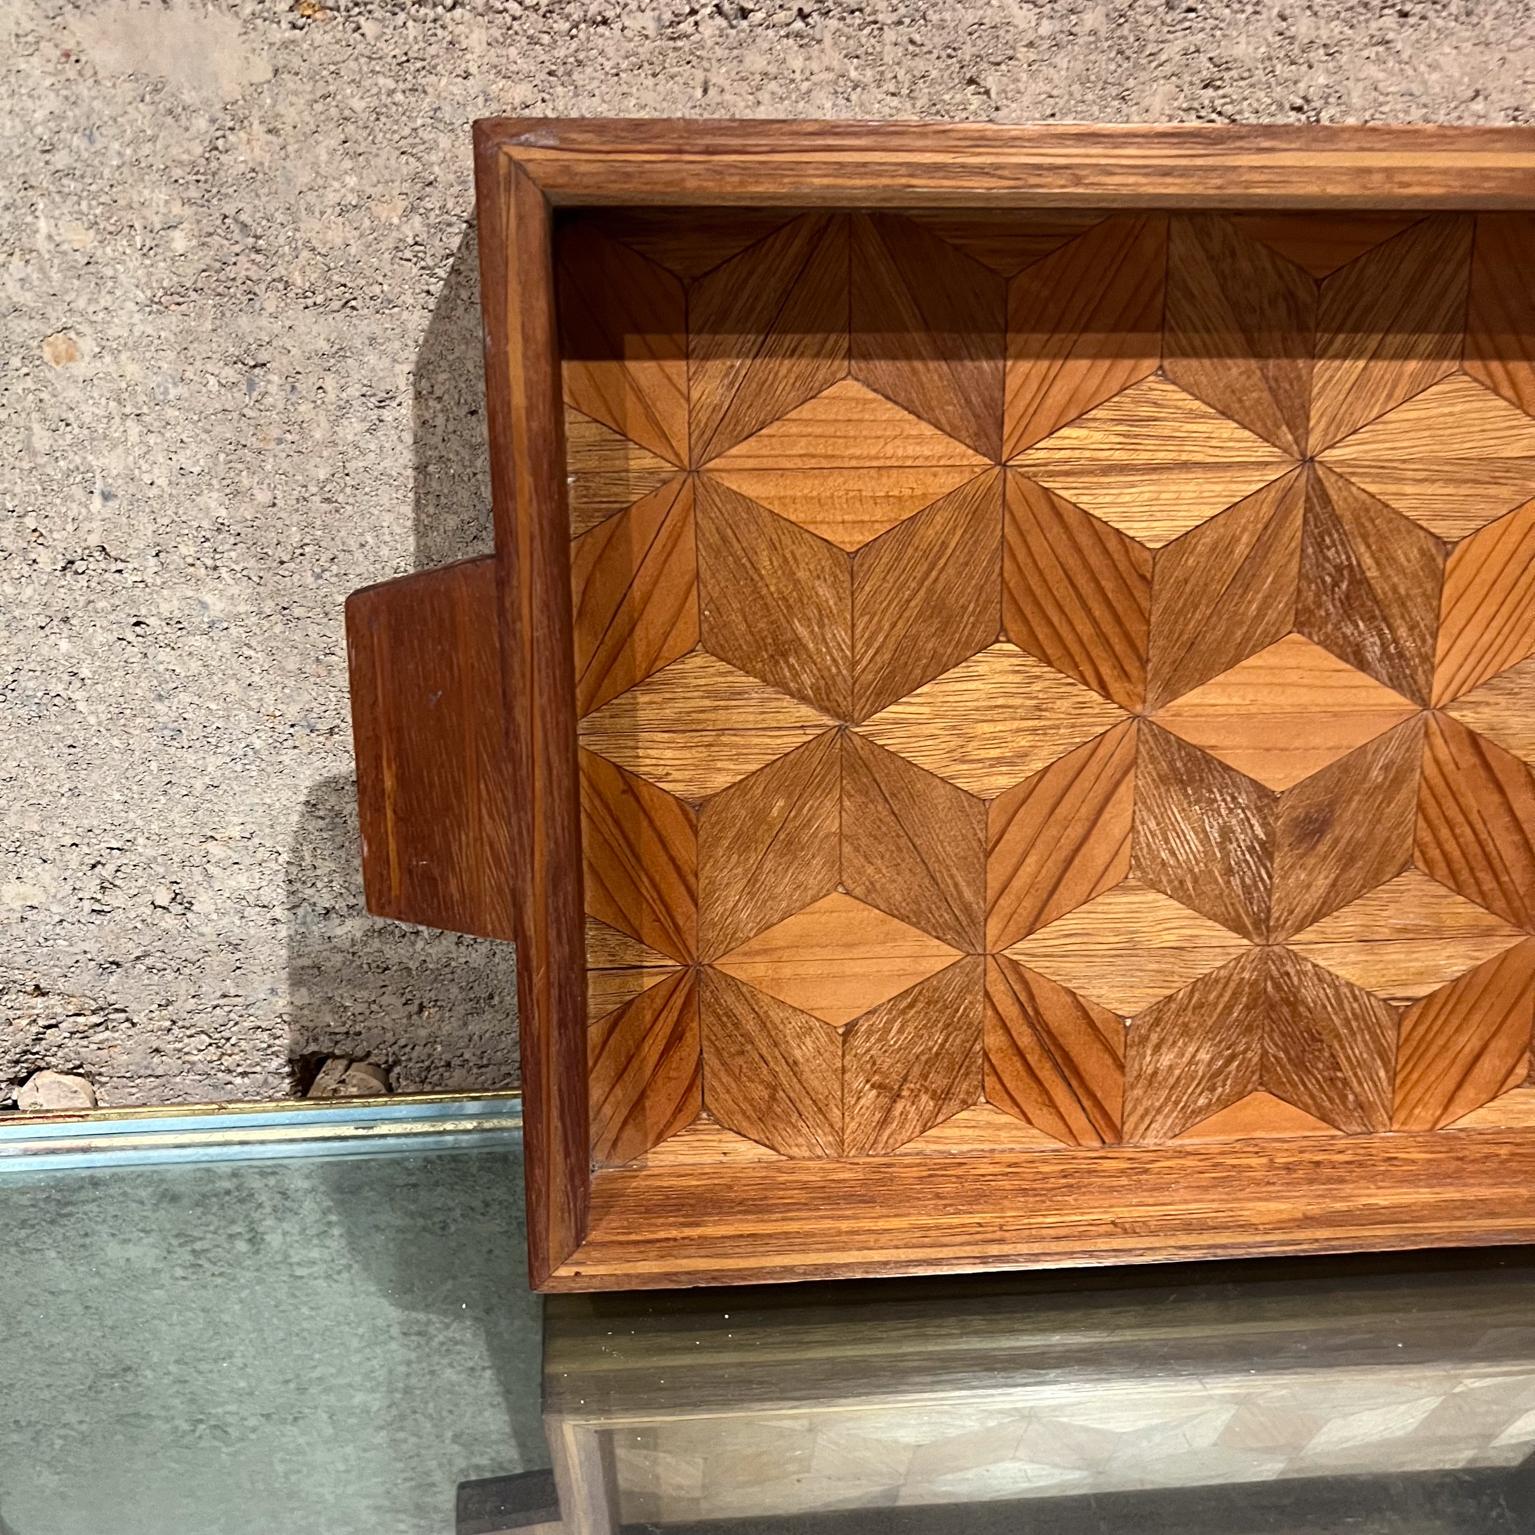 
1960s Midcentury Modern Wood Serving Tray Geometric Design
In the style of Don Shoemaker
9.75 d x 16.5 long x 1.5
Preowned original vintage condition
See all images.